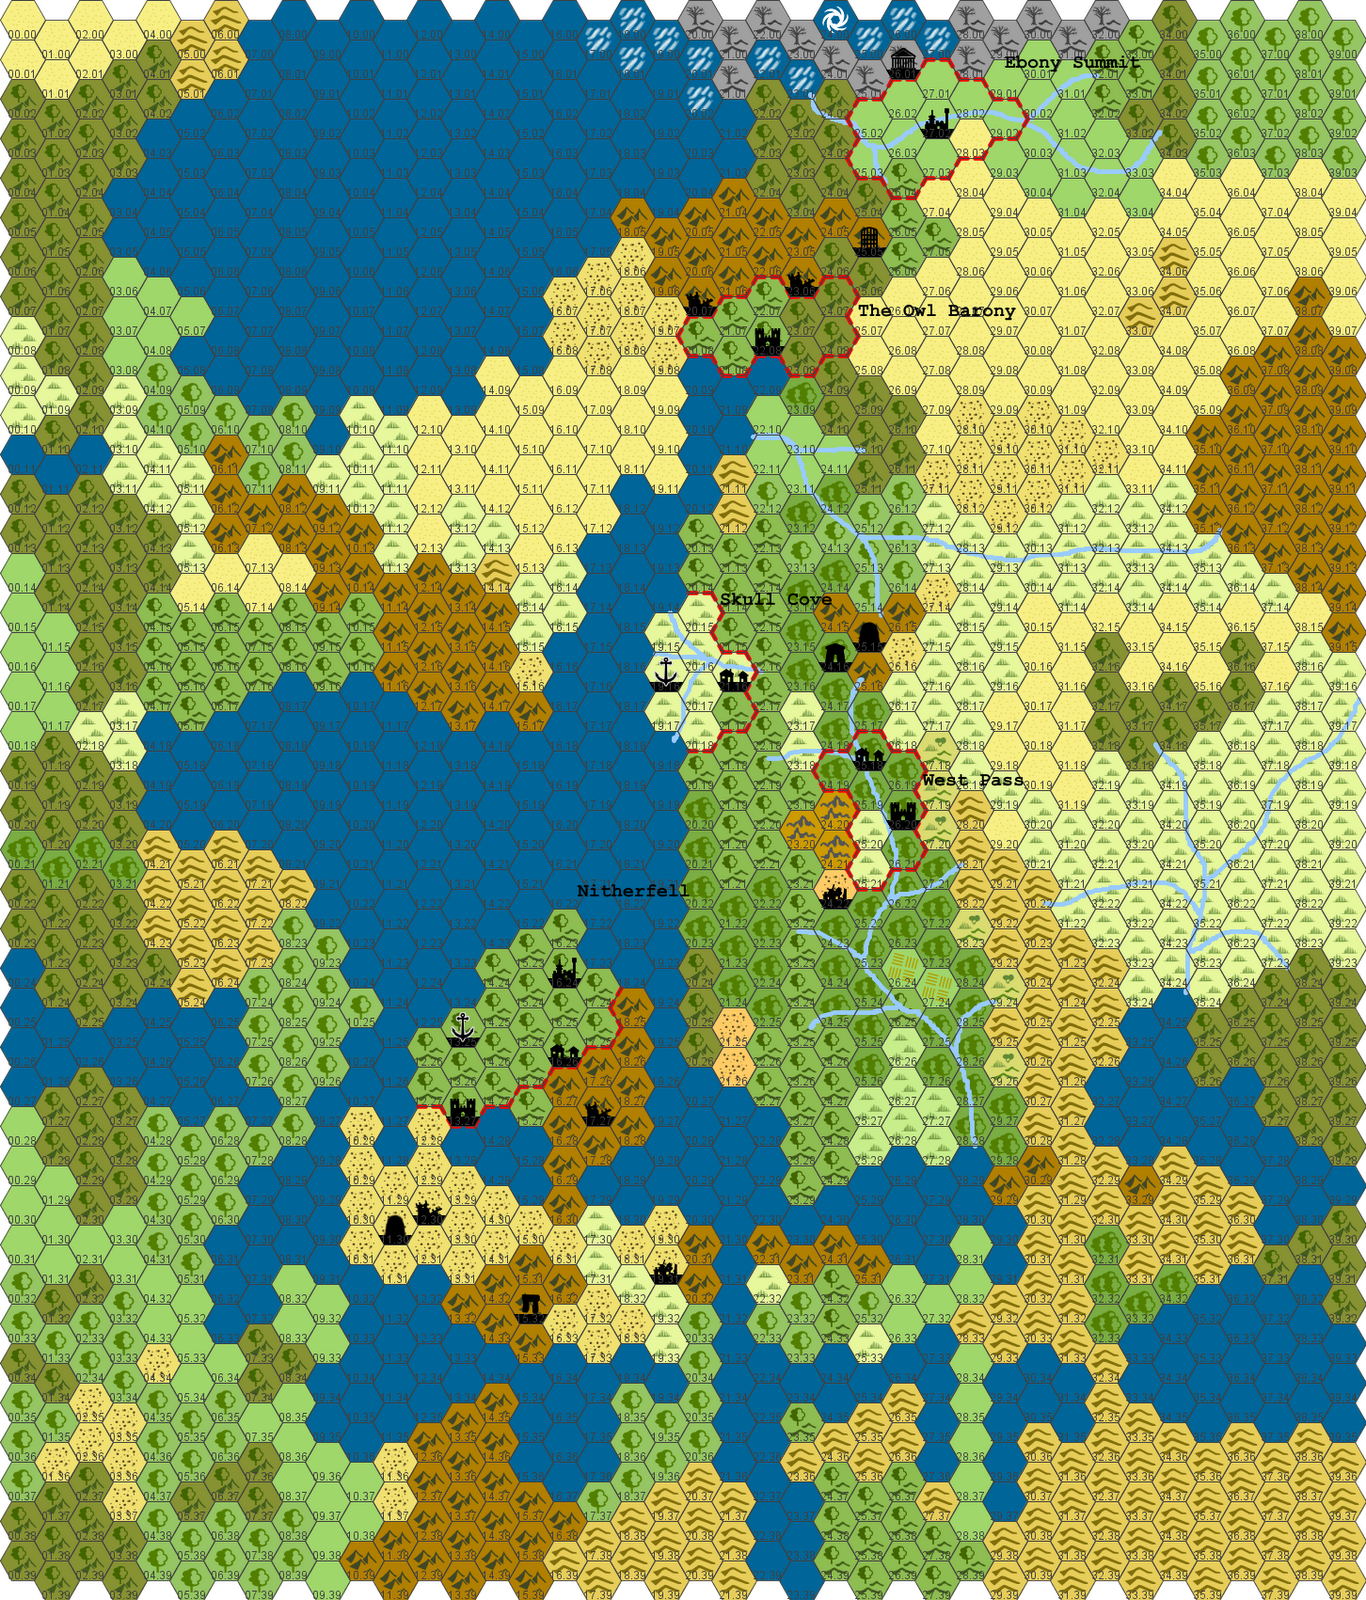 Over the Misty Mountains: Hex-Stocking